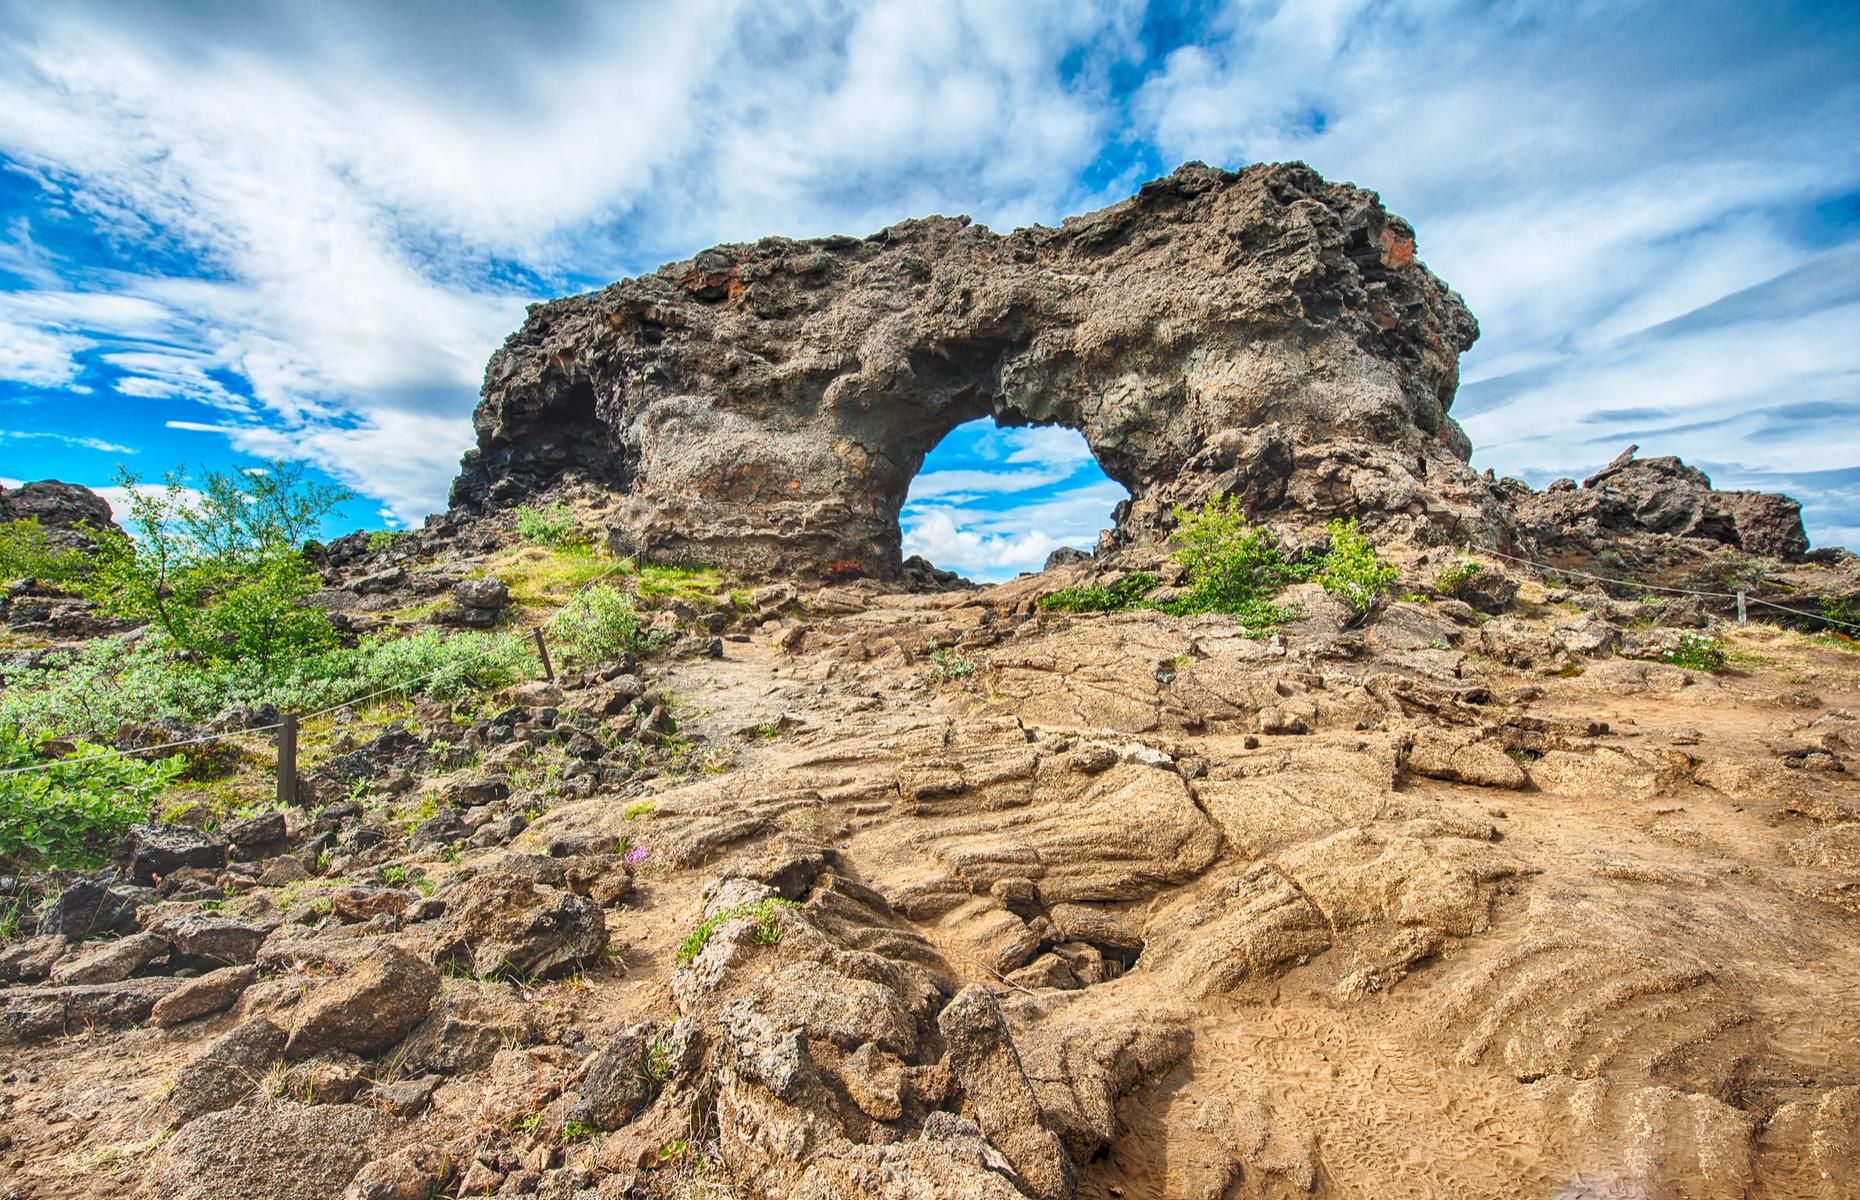 <p>You can find evidence of Myvatn’s volcanic past by exploring the Dimmuborgir lava formations (pictured), a series of small mossy canyons. These are the home of Iceland’s infamous 13 Yule Lads, the Christmas pranksters who supposedly visit children to leave gifts or rotten potatoes.</p>  <p>A little further northeast (follow the signposts from Myvatn) is the Krafla area, one of Iceland's most active volcanic areas where the lava is still steaming hot after its last eruption in 1984.</p>